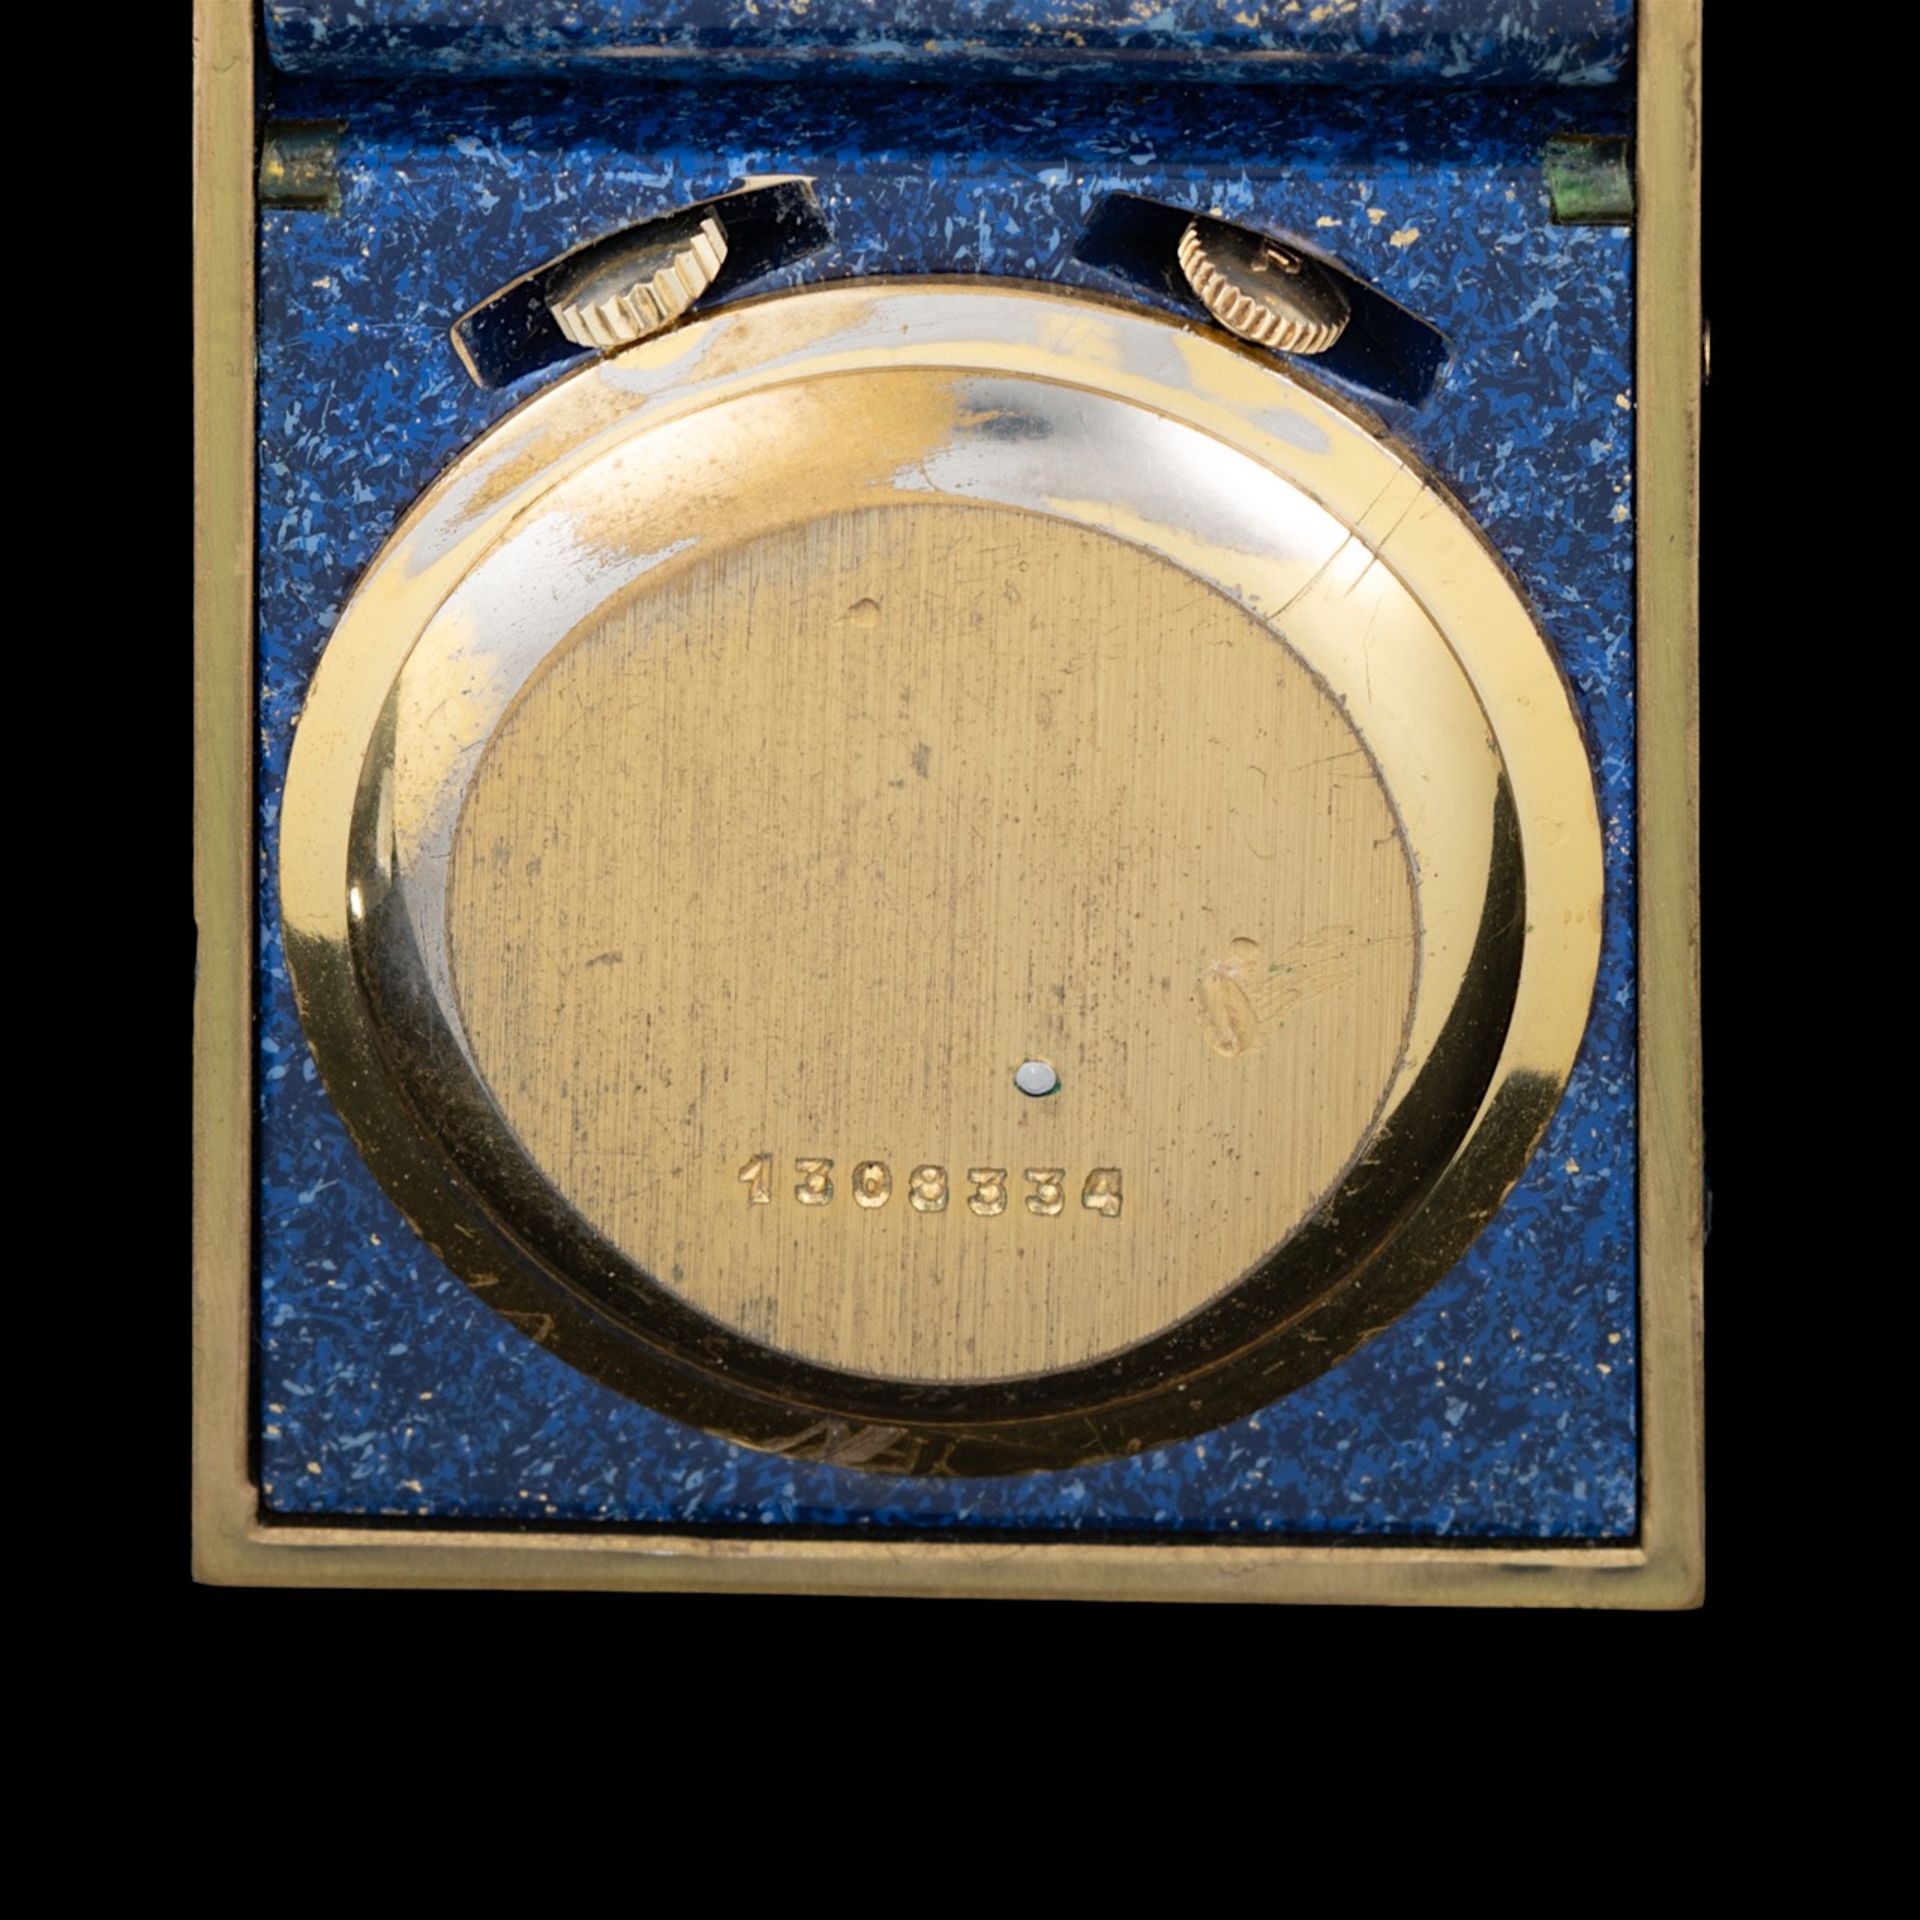 A Jaeger-LeCoultre folding travel alarm clock, W 4,3 - H 5,2 - total thickness 1,3 cm - Image 4 of 6